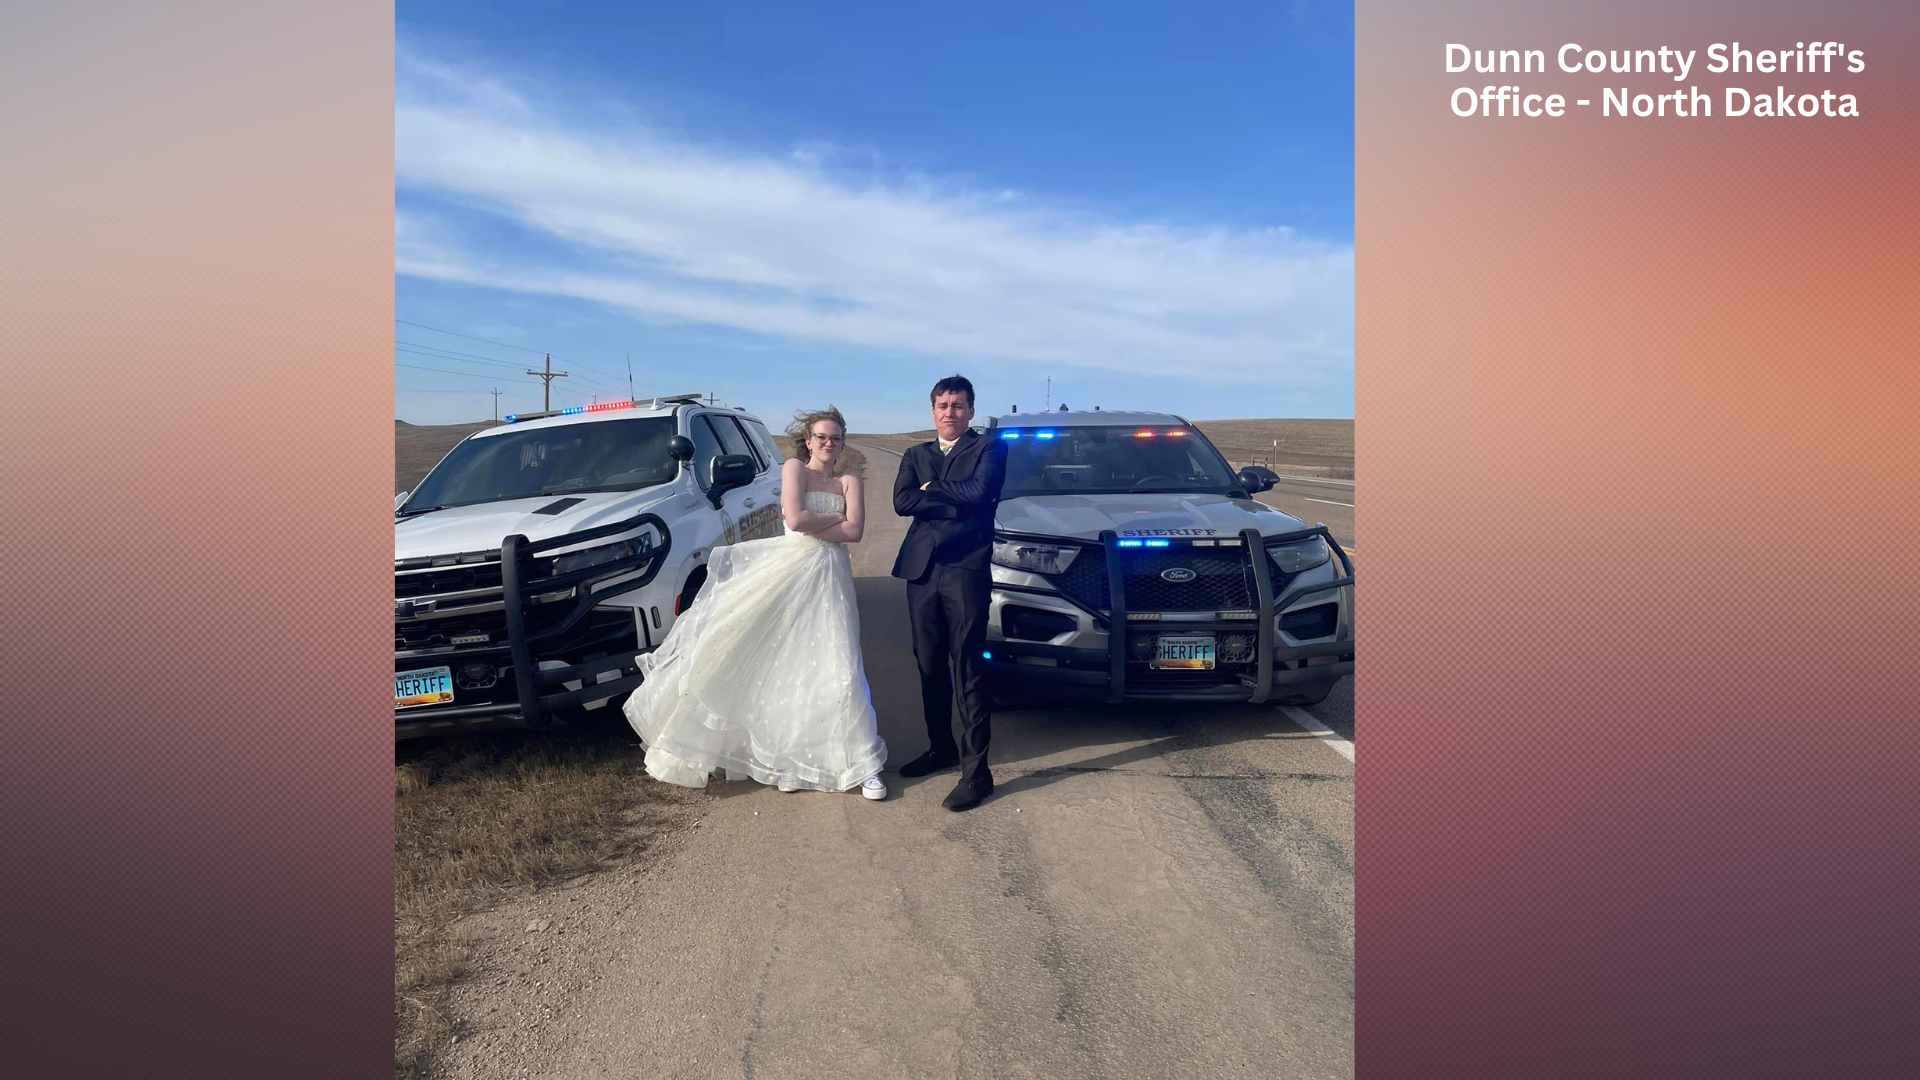 Police help students make it to the prom